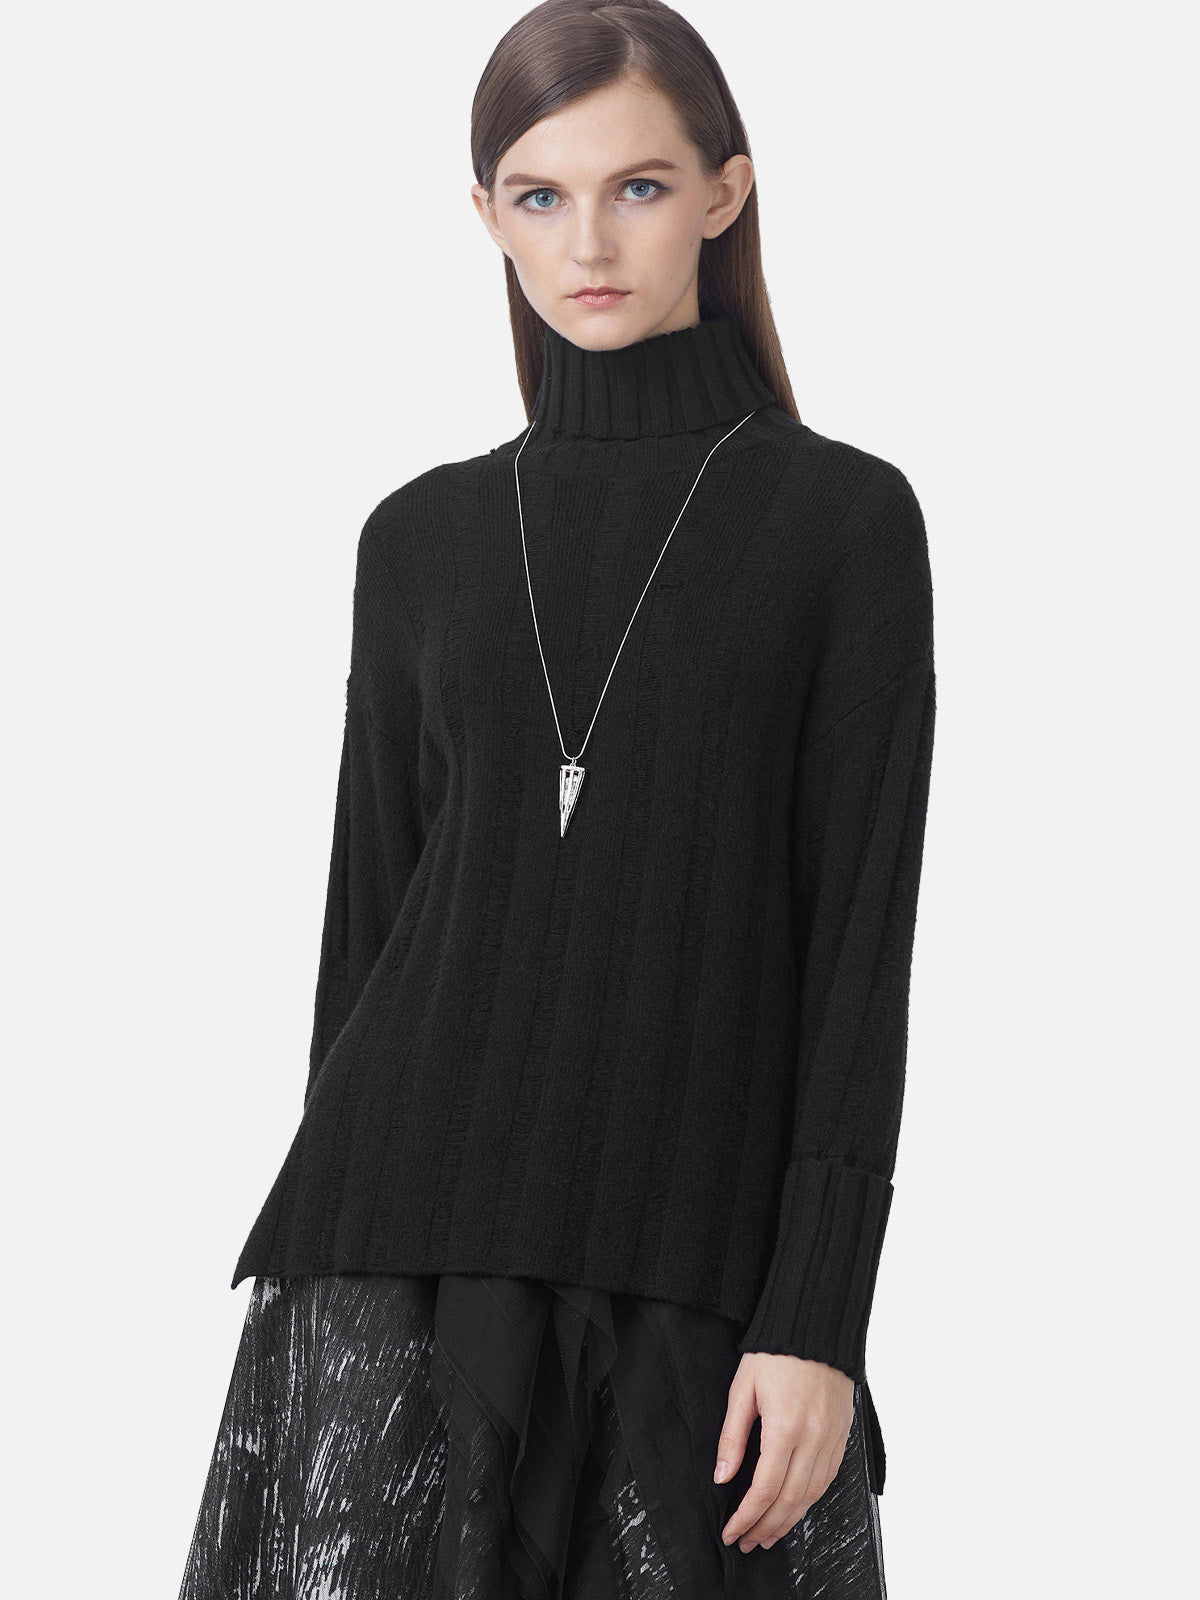 Ribbed Turtleneck Textured Rolled Black Knit Sweater